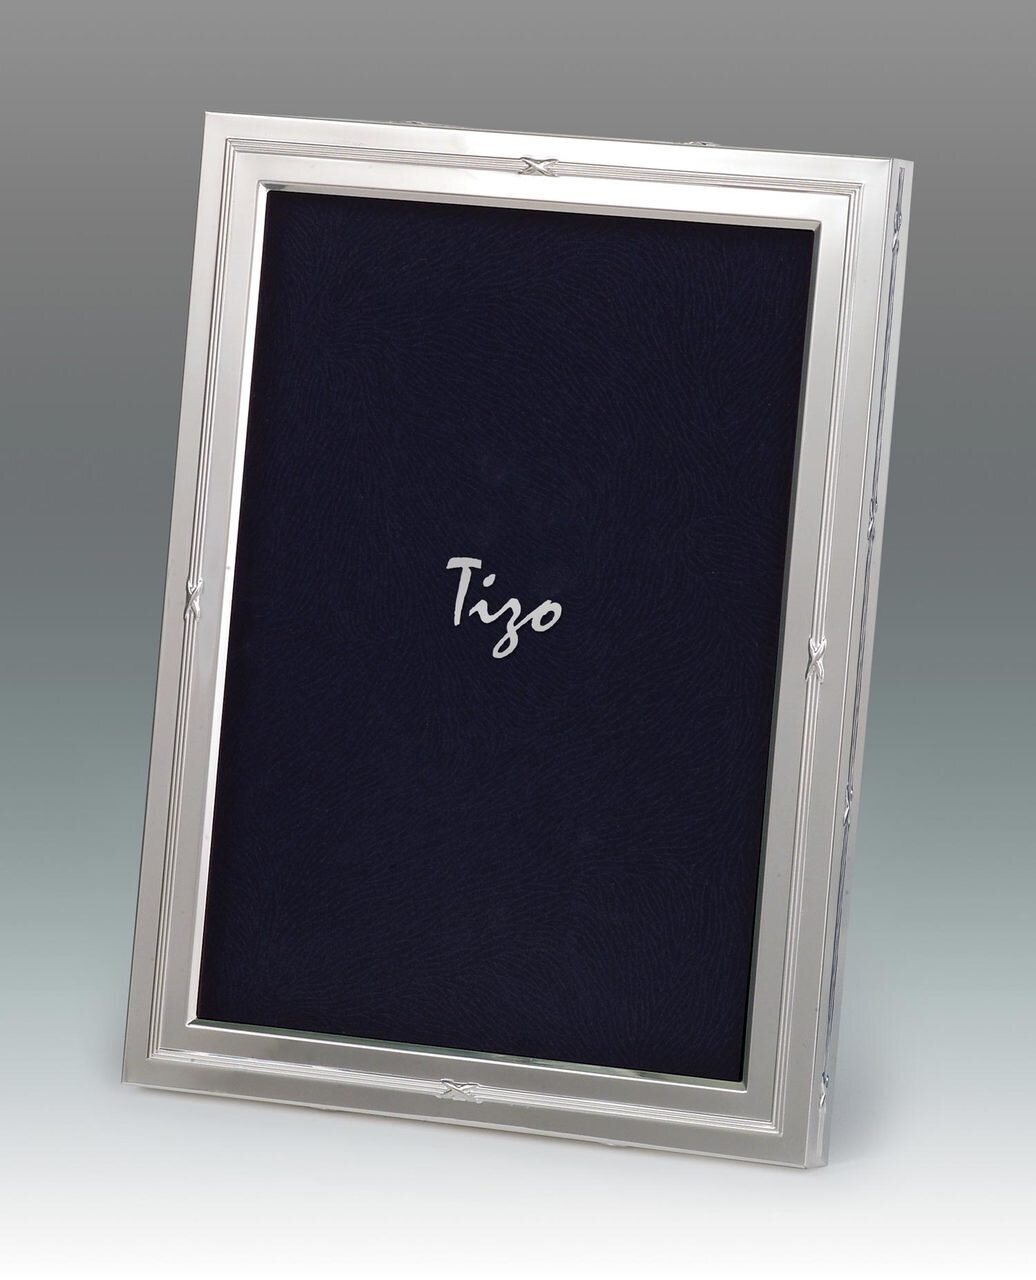 Tizo Papions 4 x 6 Inch Silver Plated Picture Frame